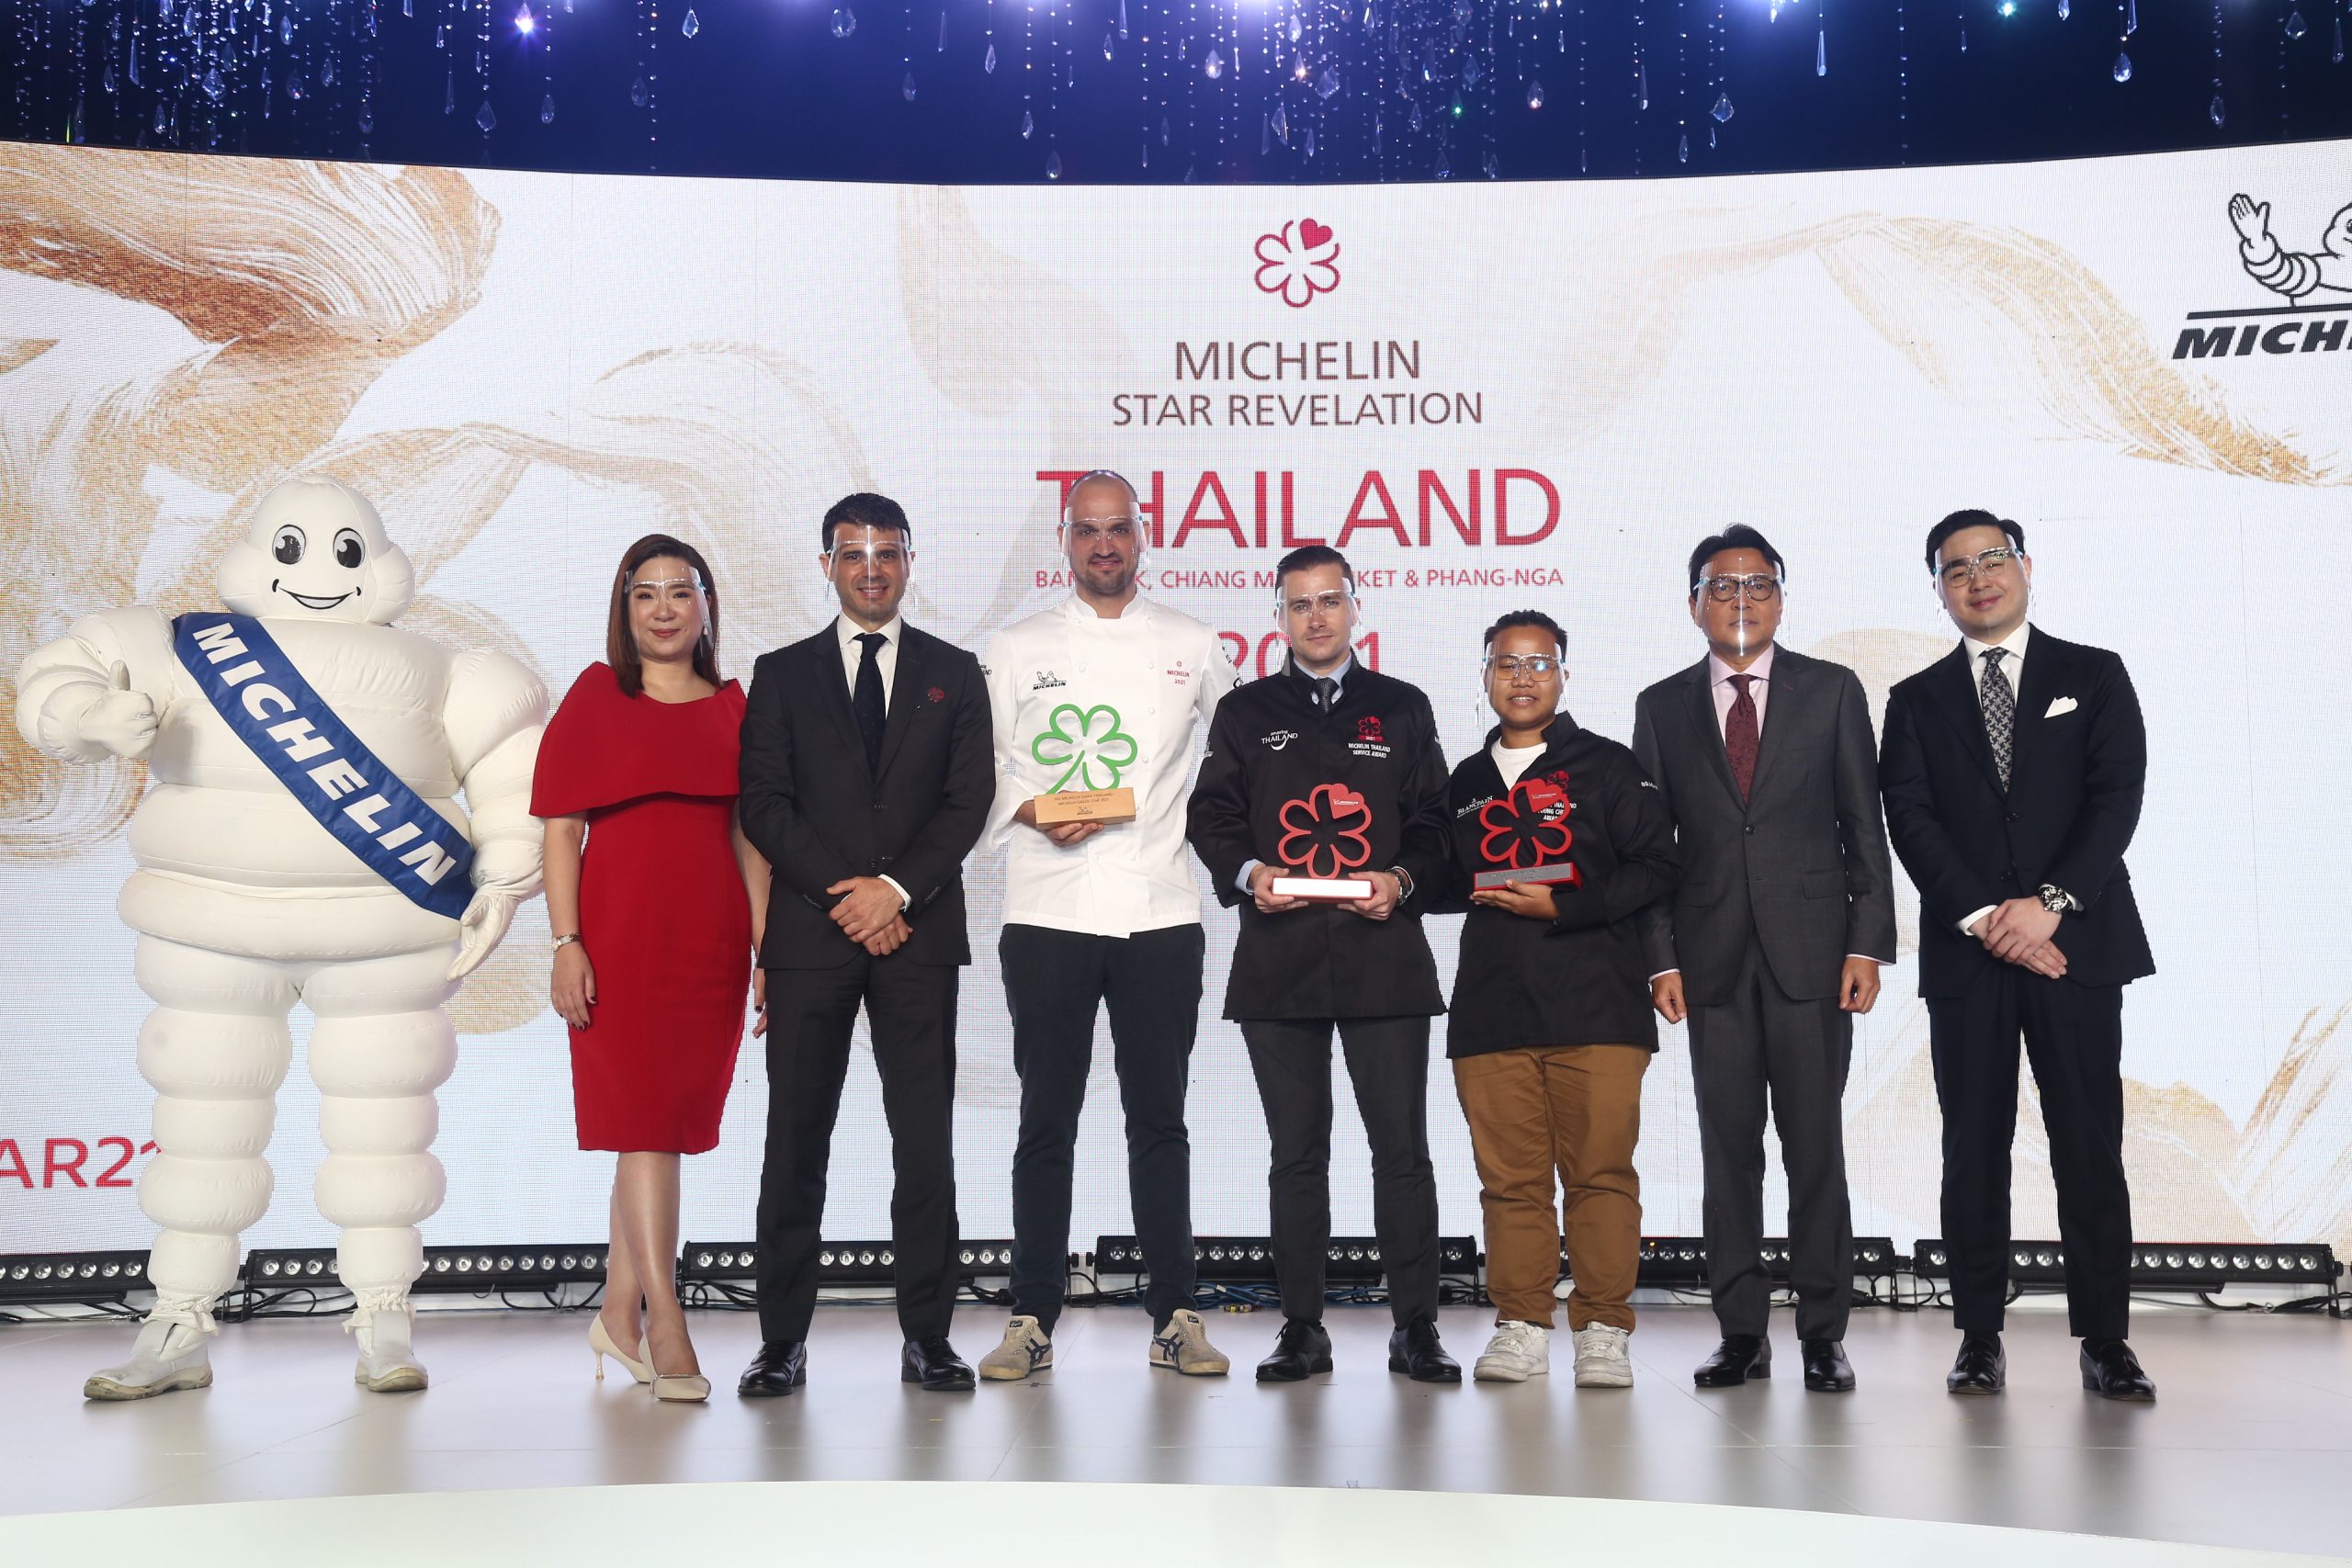 THE 2021 MICHELIN GUIDE THAILAND UNVEILS NEW STARS, WITH SUSTAINABLE RYT9